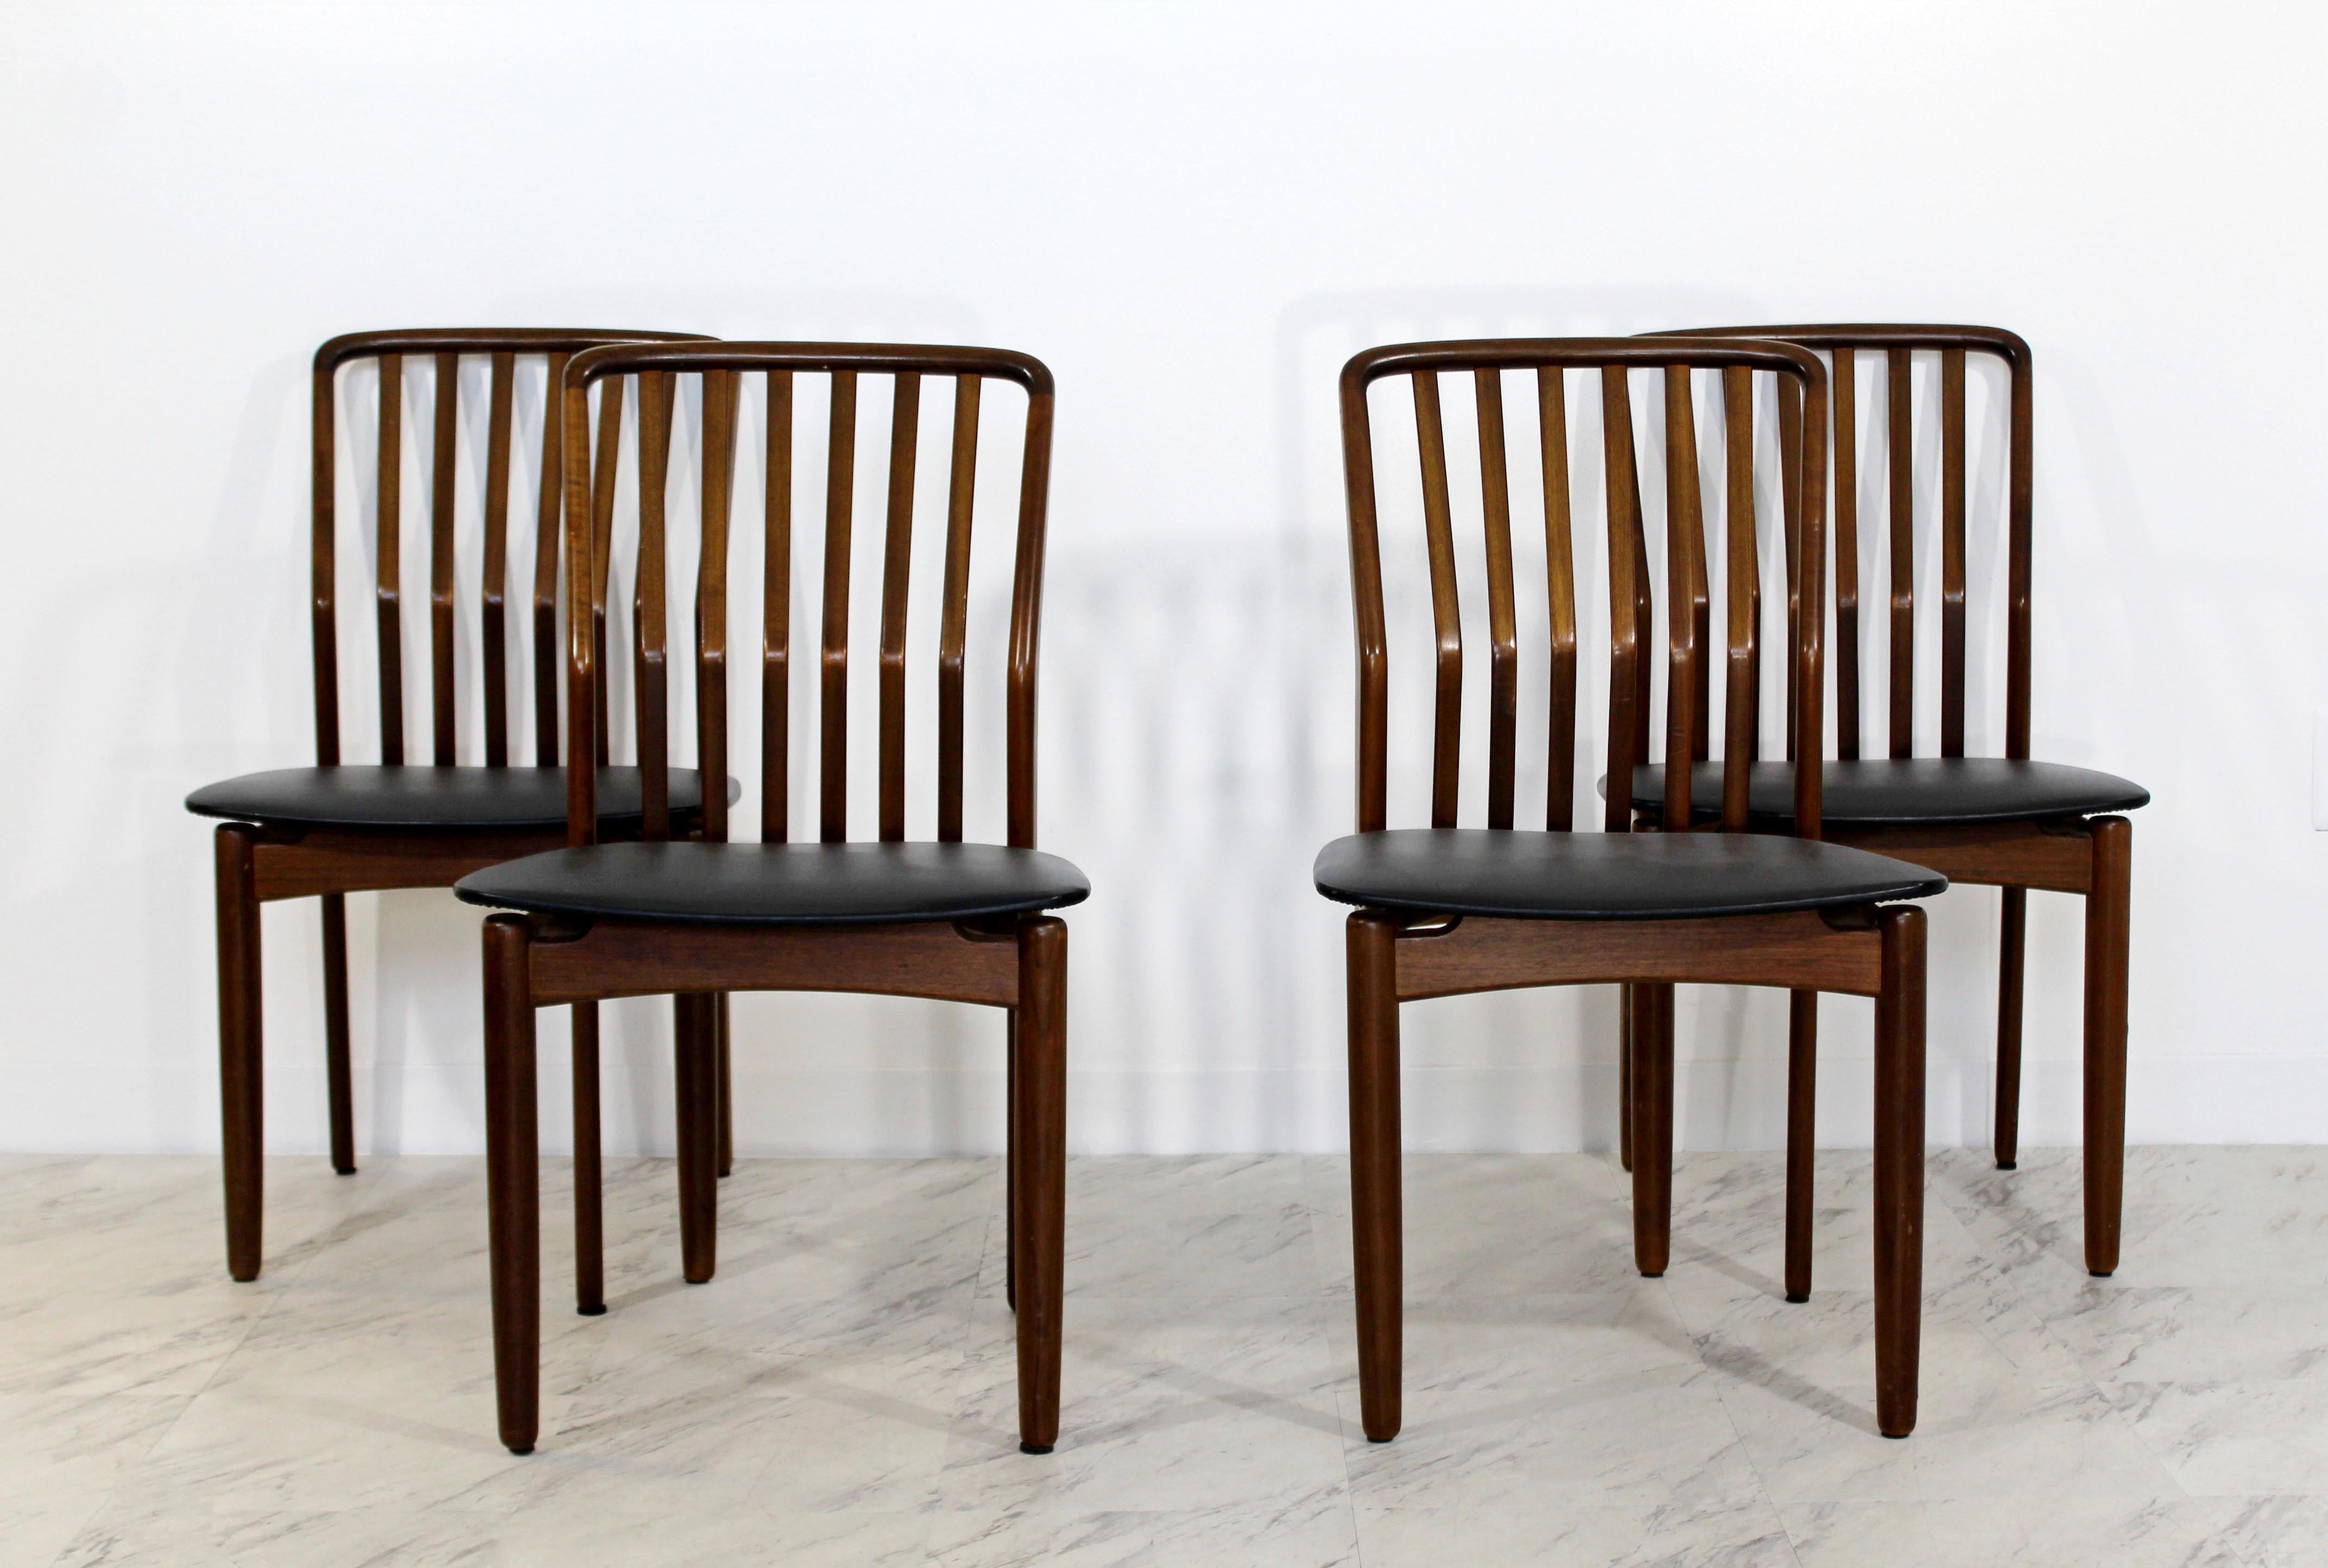 For your consideration is a marvellous set of four, walnut and black leather, side dining chairs, by Sven Madsen, circa 1950s. In very good condition. The dimensions of each chair are 19